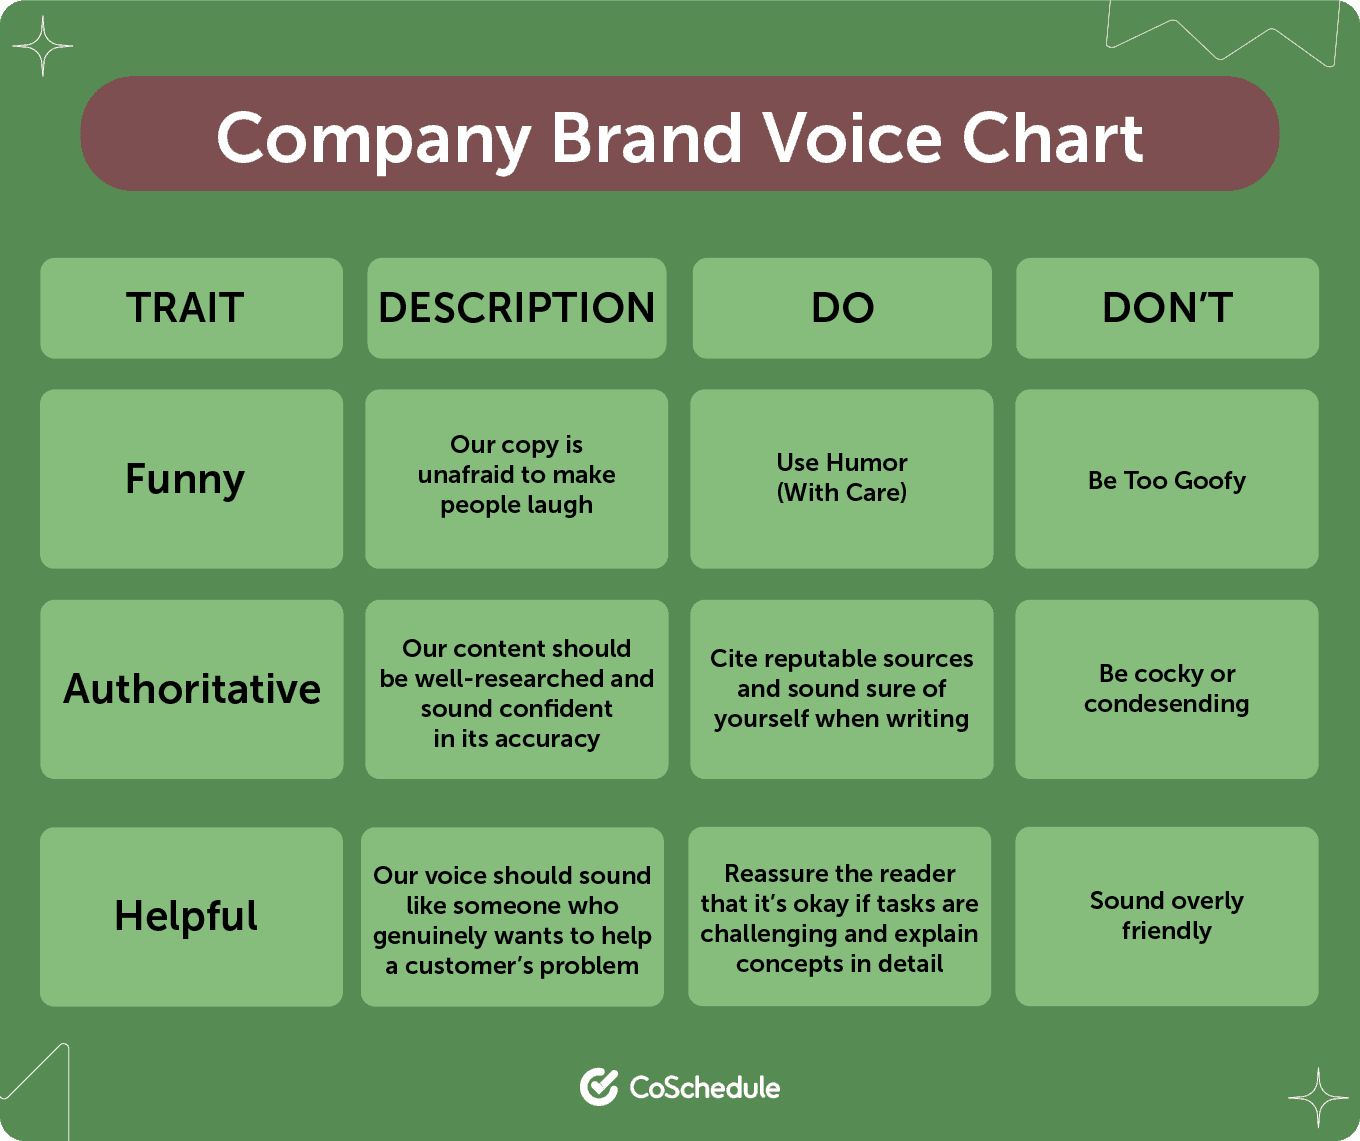 Brand voice chart of traits, descriptions, do's and don'ts